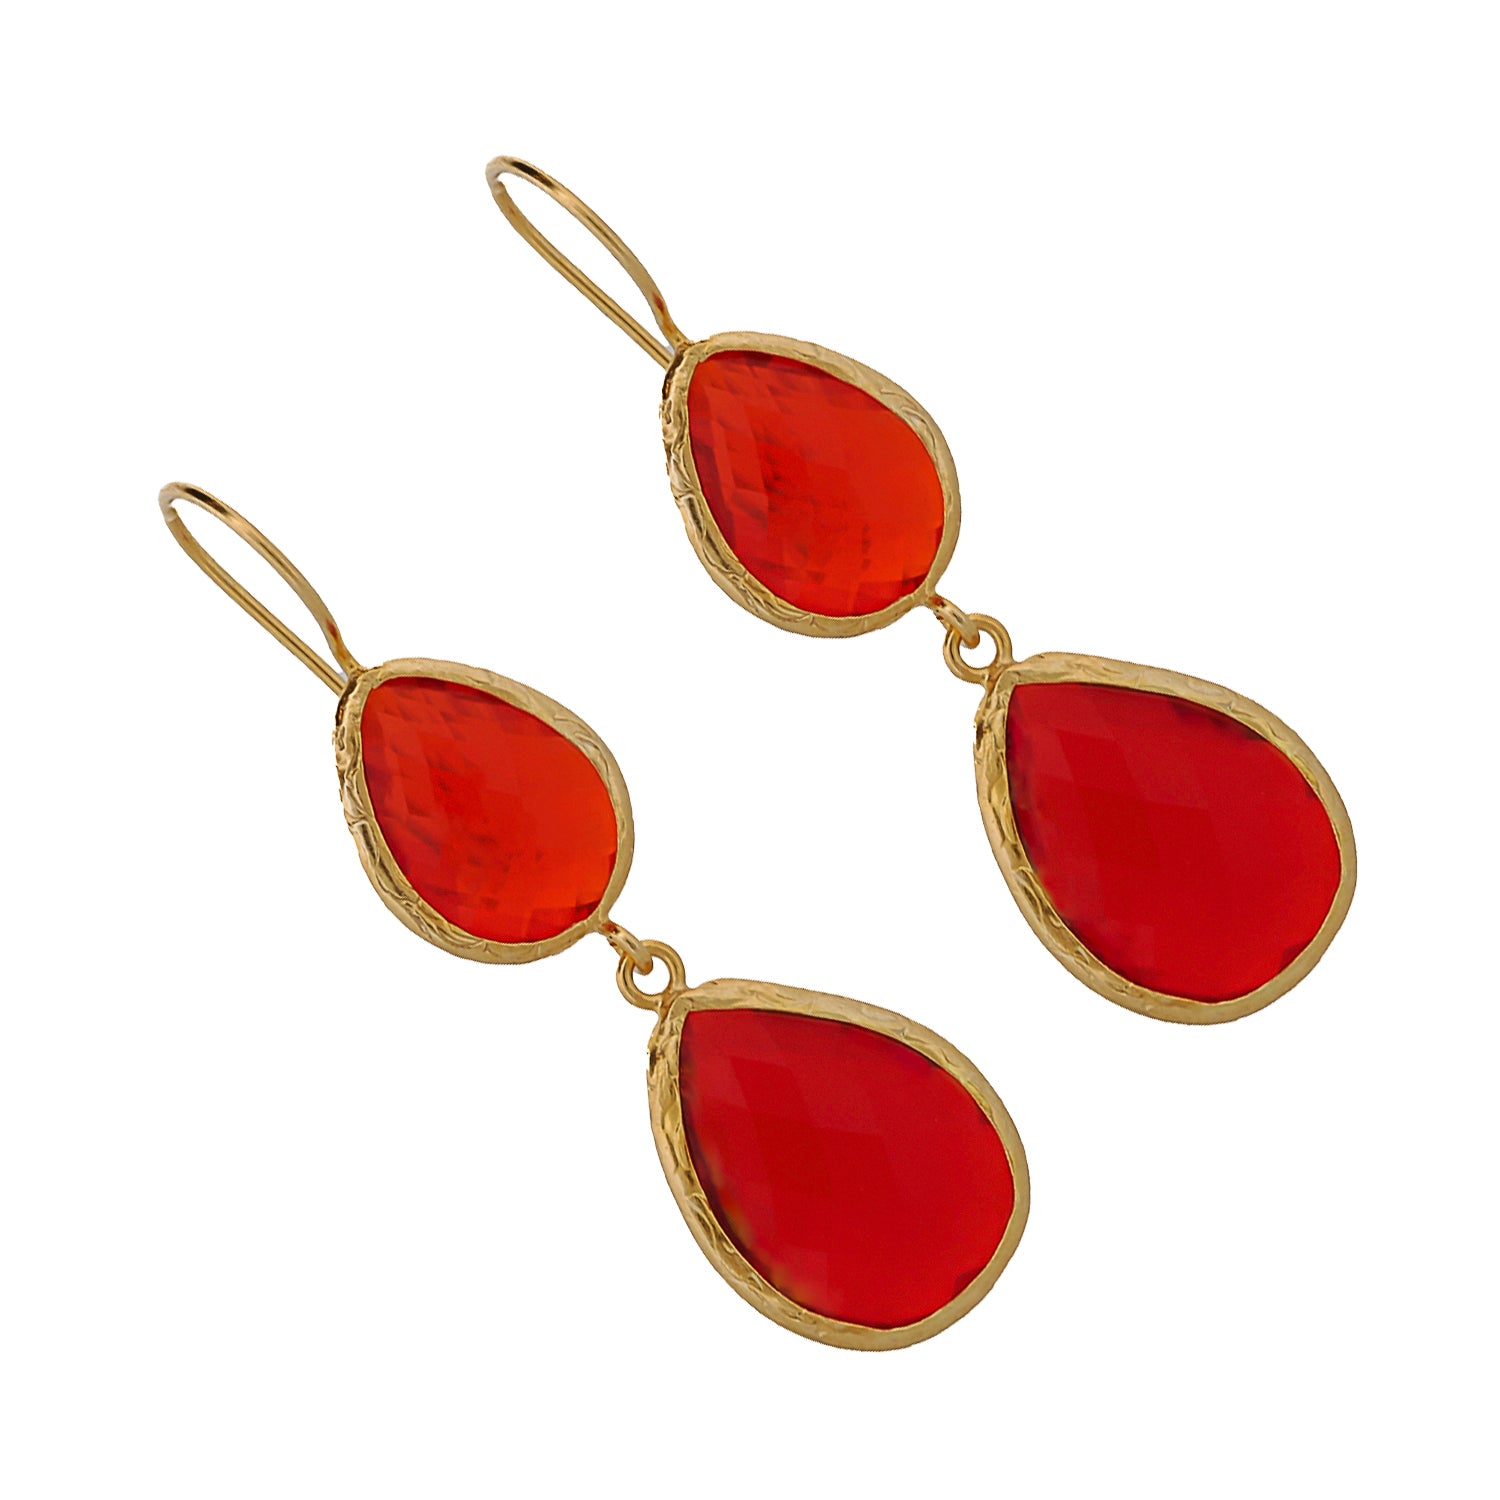 Timeless Beauty: 18K Gold-Plated Earrings with Handmade Sterling Silver Base